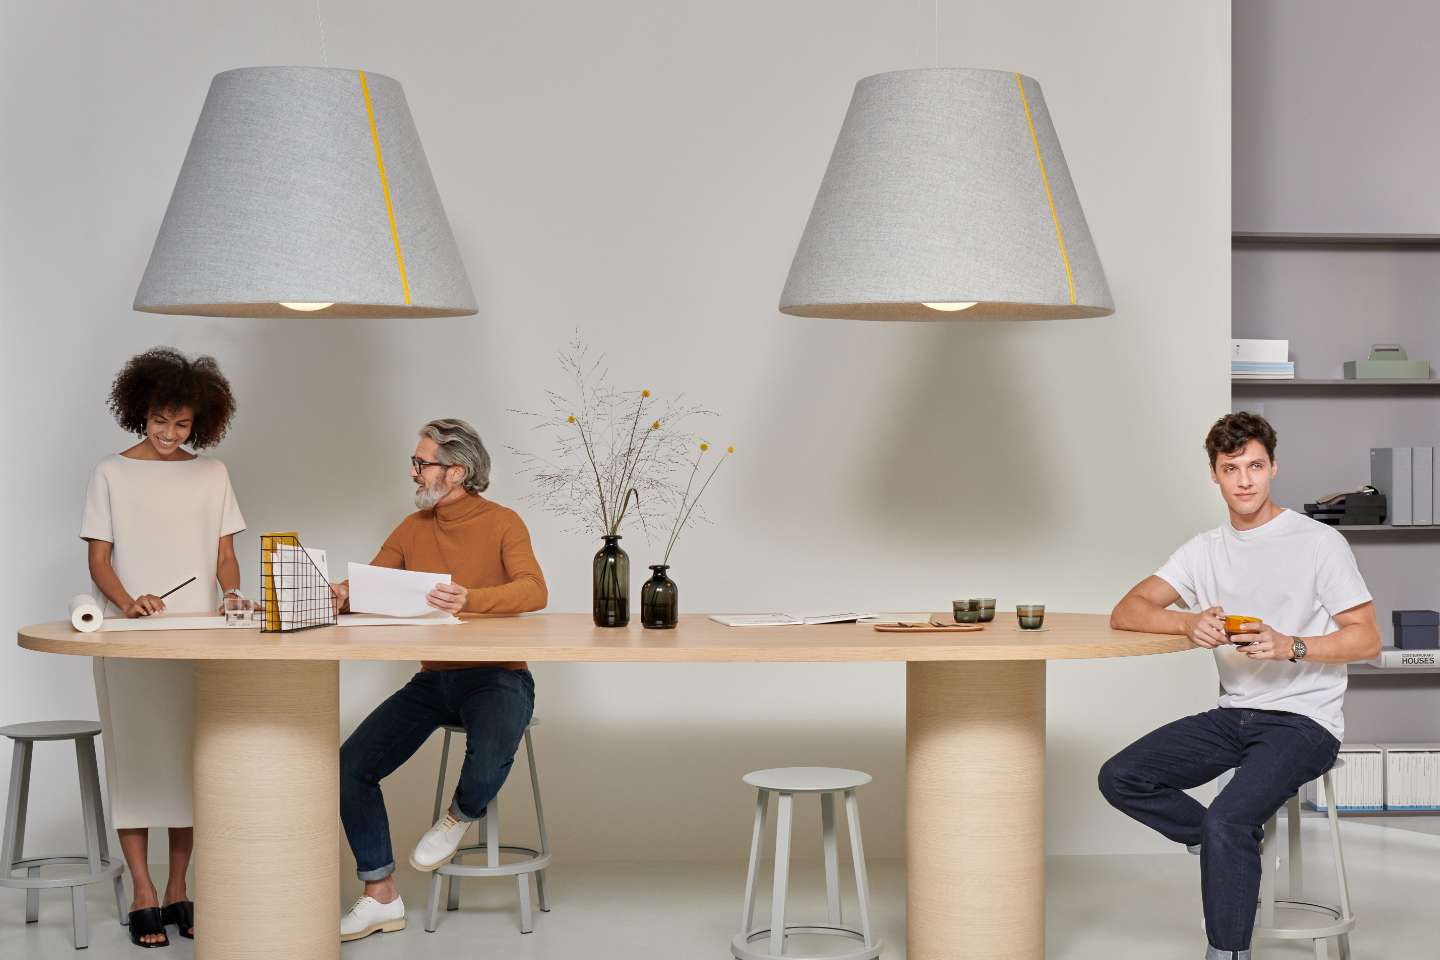 Mute Bell Lamp in office interior with tabletop beneath and people talking